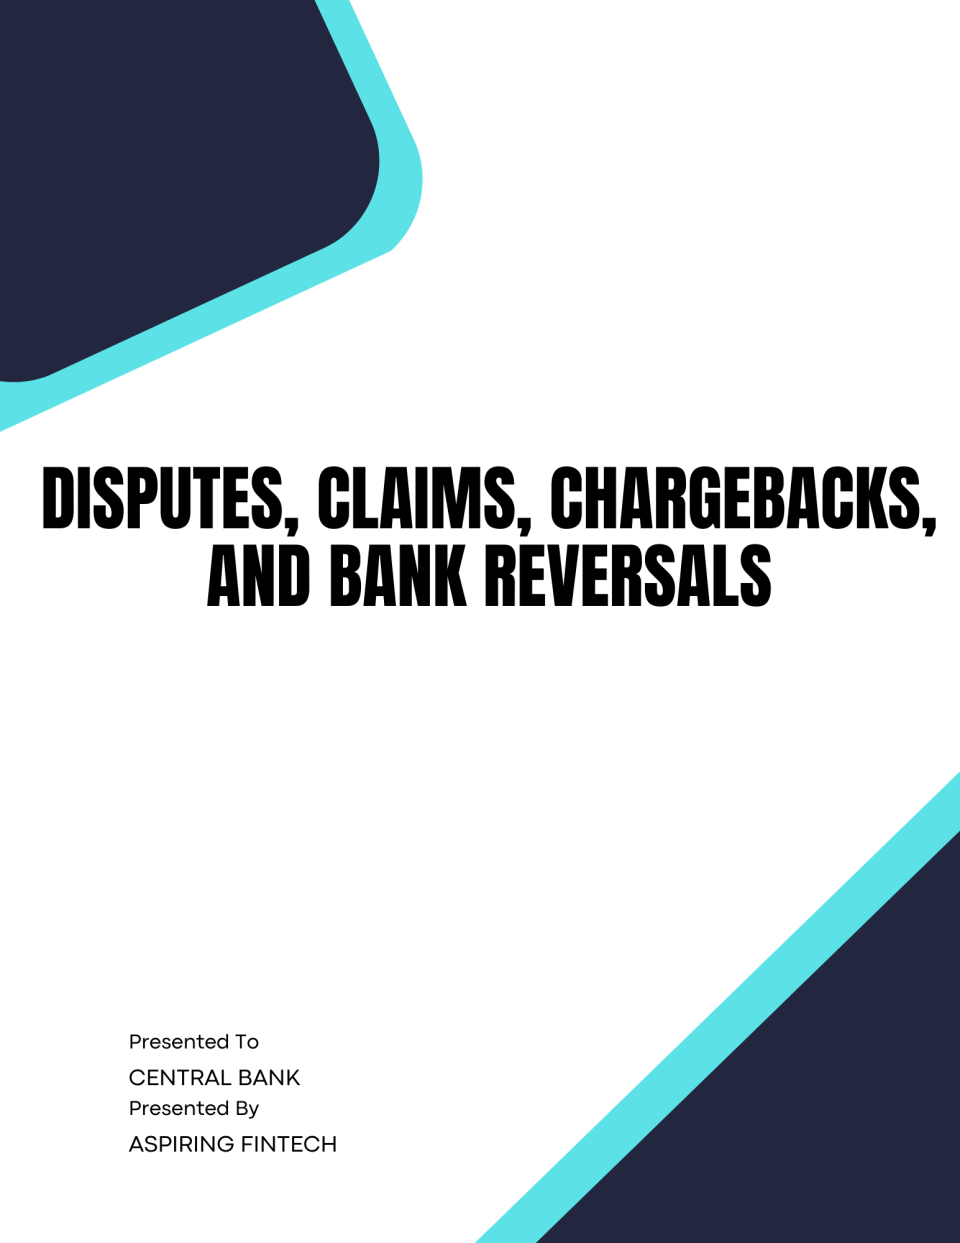 Disputes, claims, chargebacks, and bank reversals.